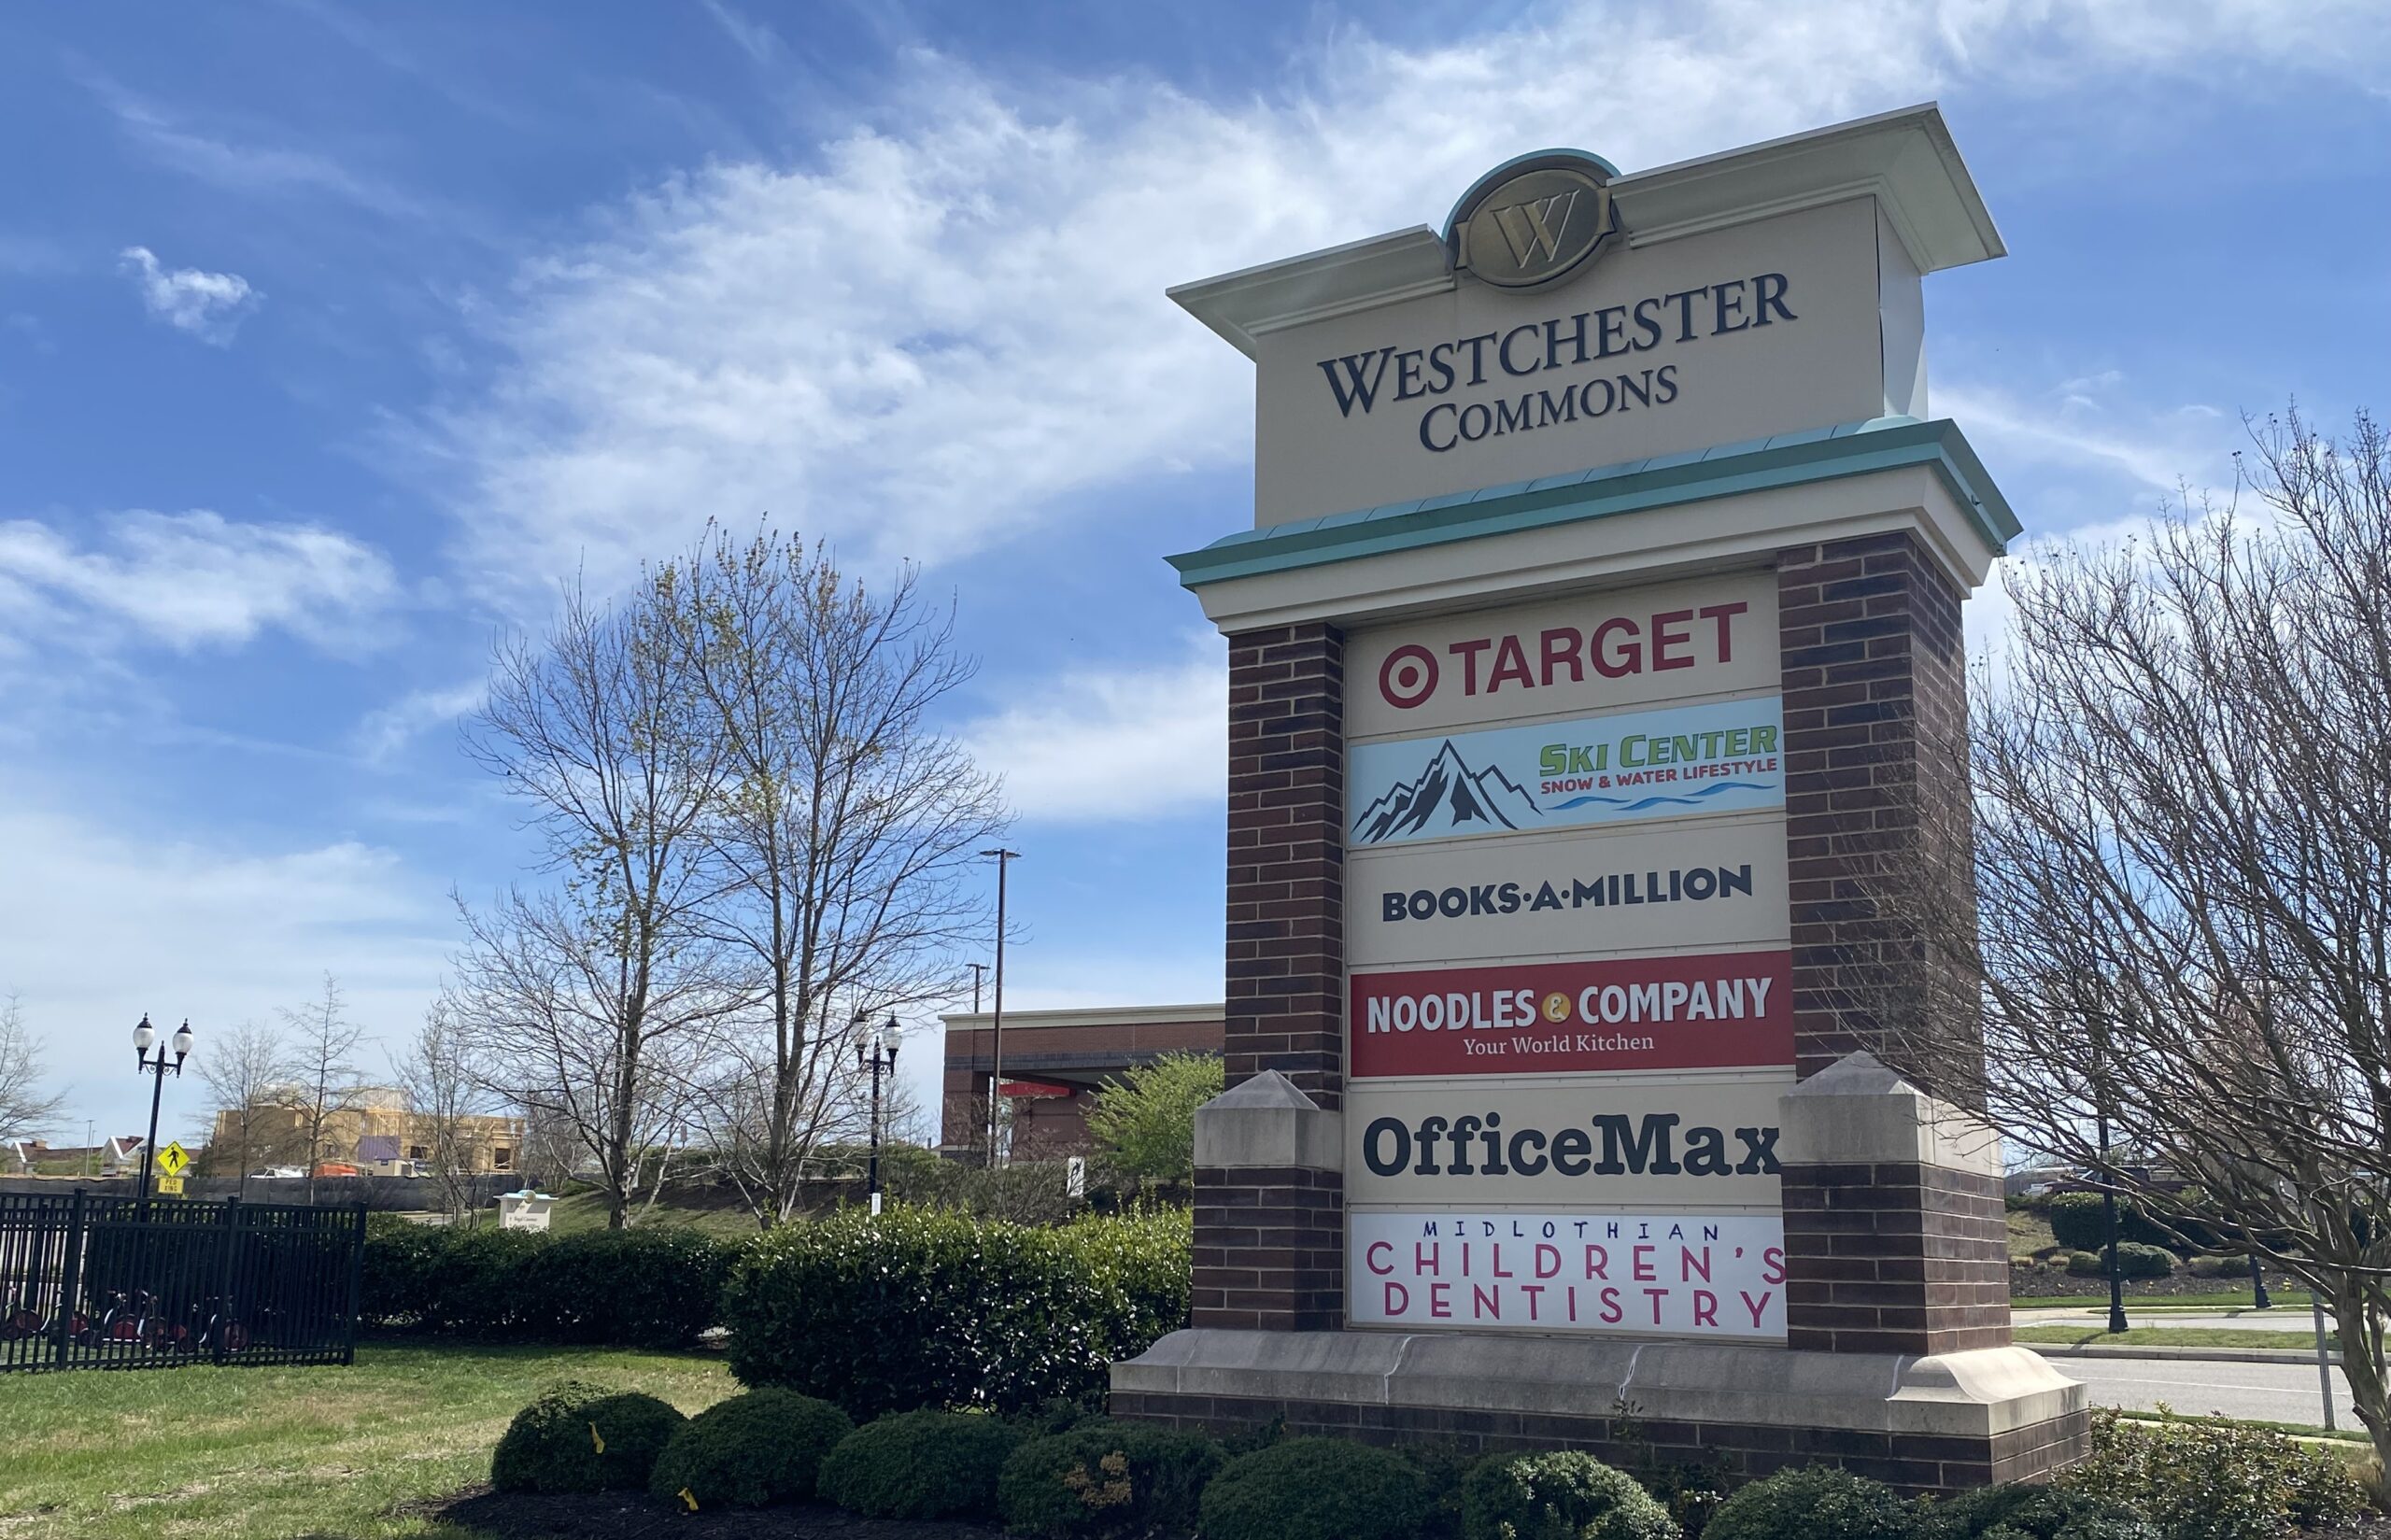 New retail anchor space in store for Westchester Commons Richmond